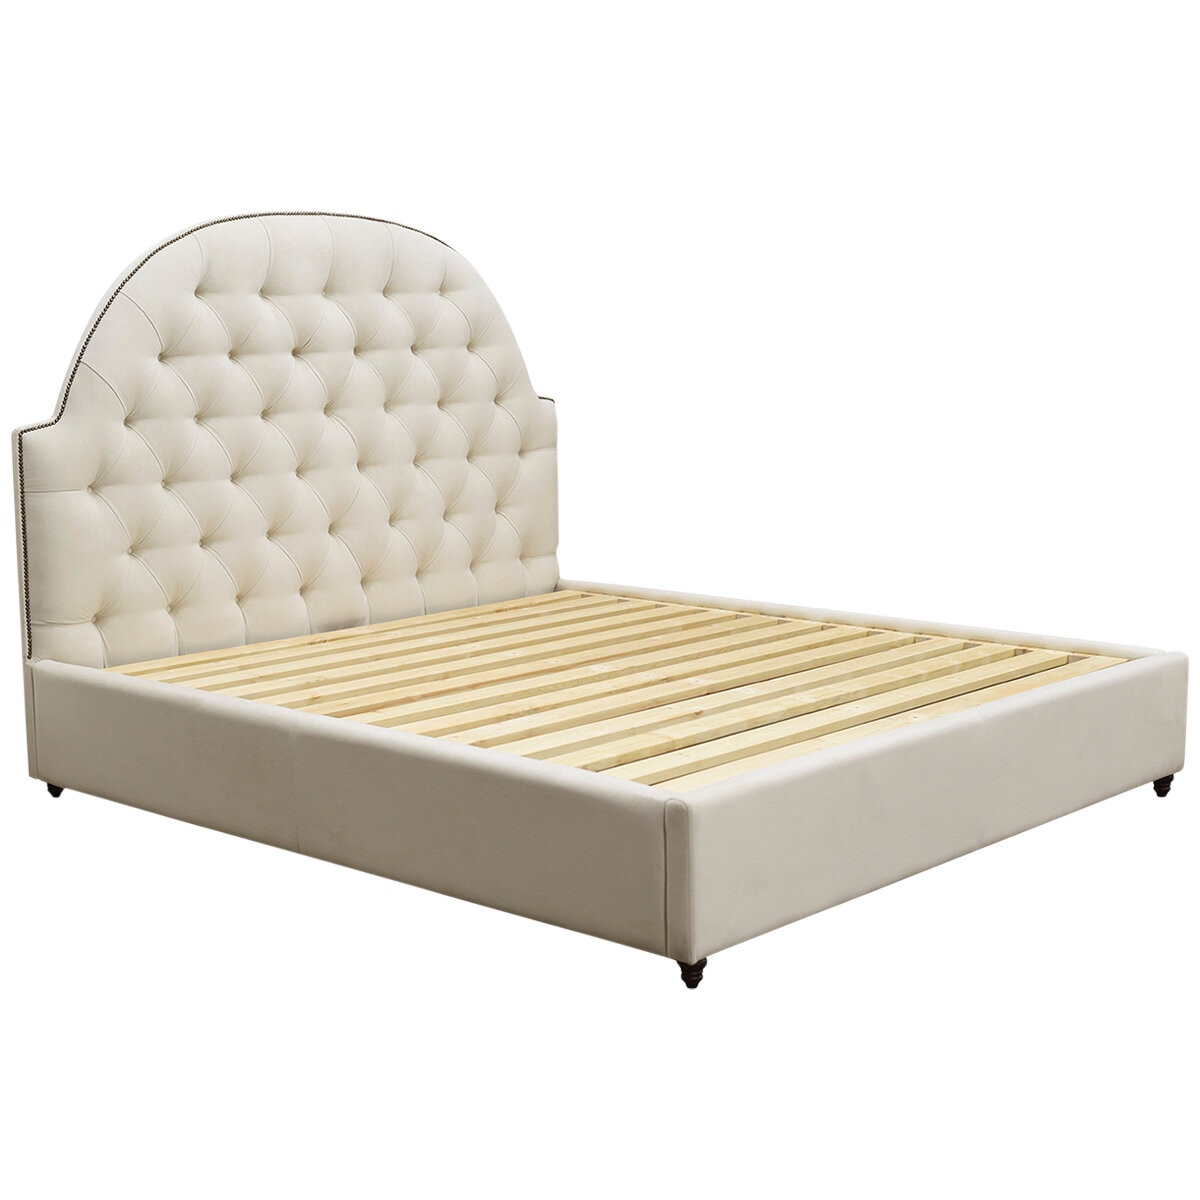 Moran Princess King Bedhead With Encasement With Slatted Base Cream